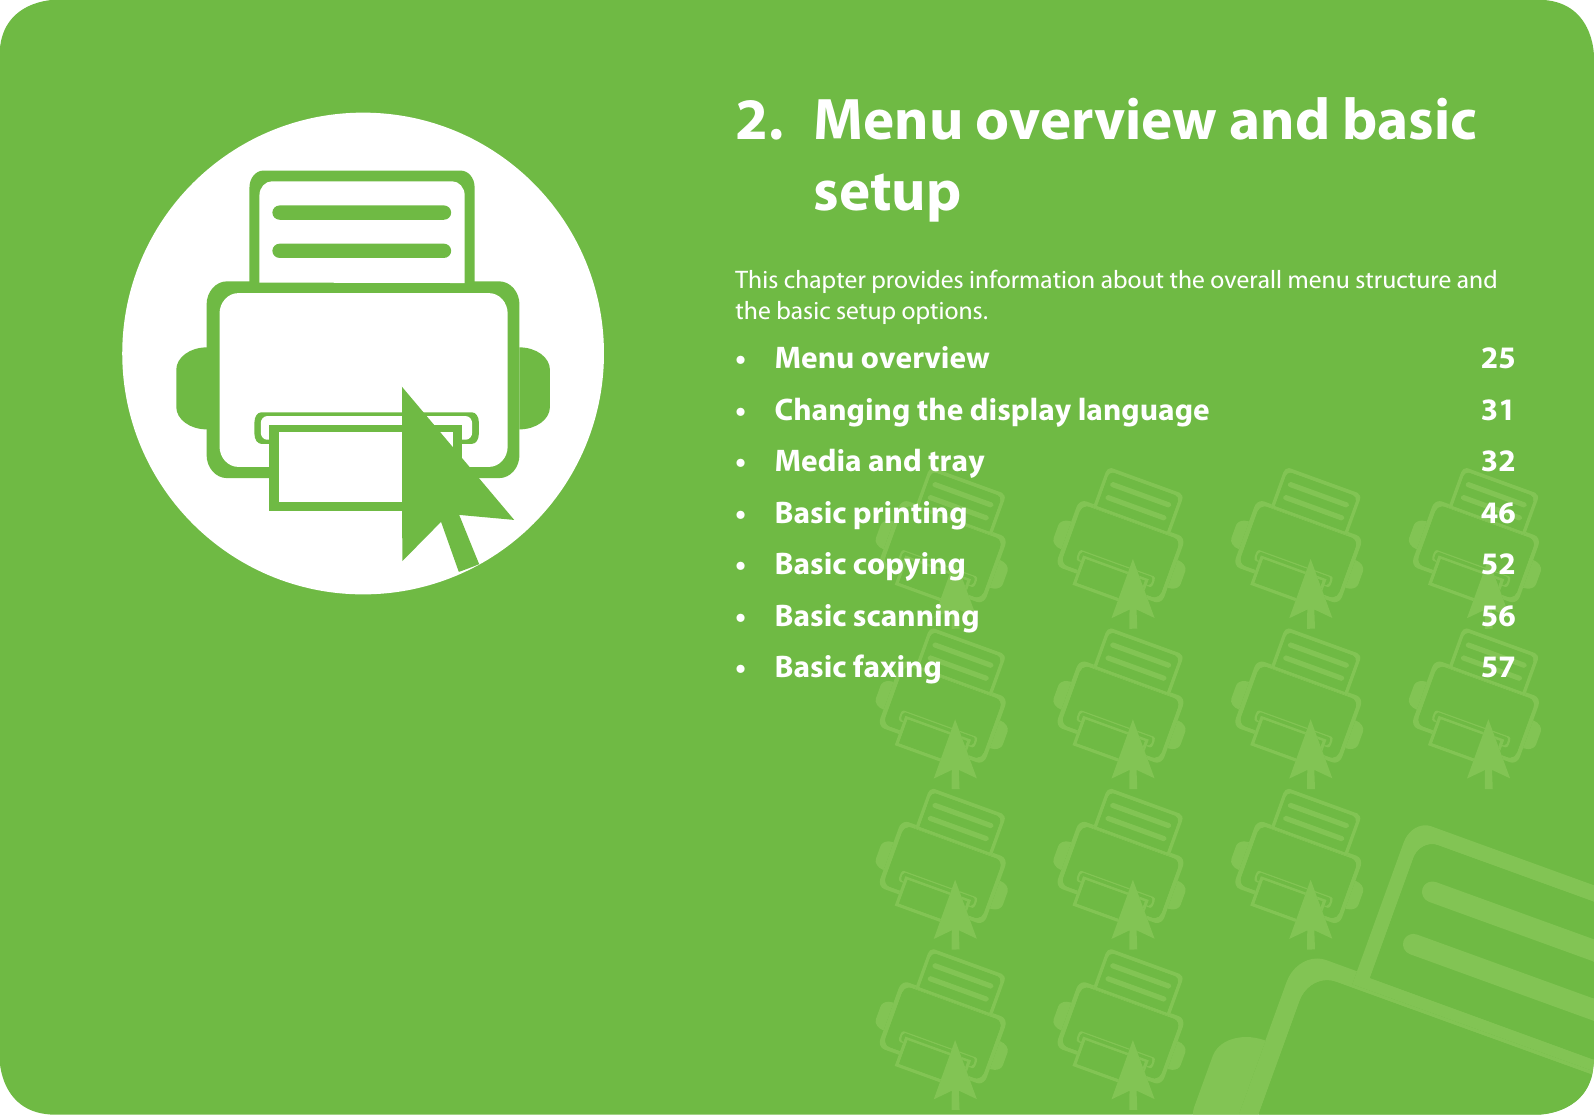 2. Menu overview and basic setupThis chapter provides information about the overall menu structure and the basic setup options.• Menu overview 25• Changing the display language 31• Media and tray 32• Basic printing 46• Basic copying 52• Basic scanning 56• Basic faxing 57